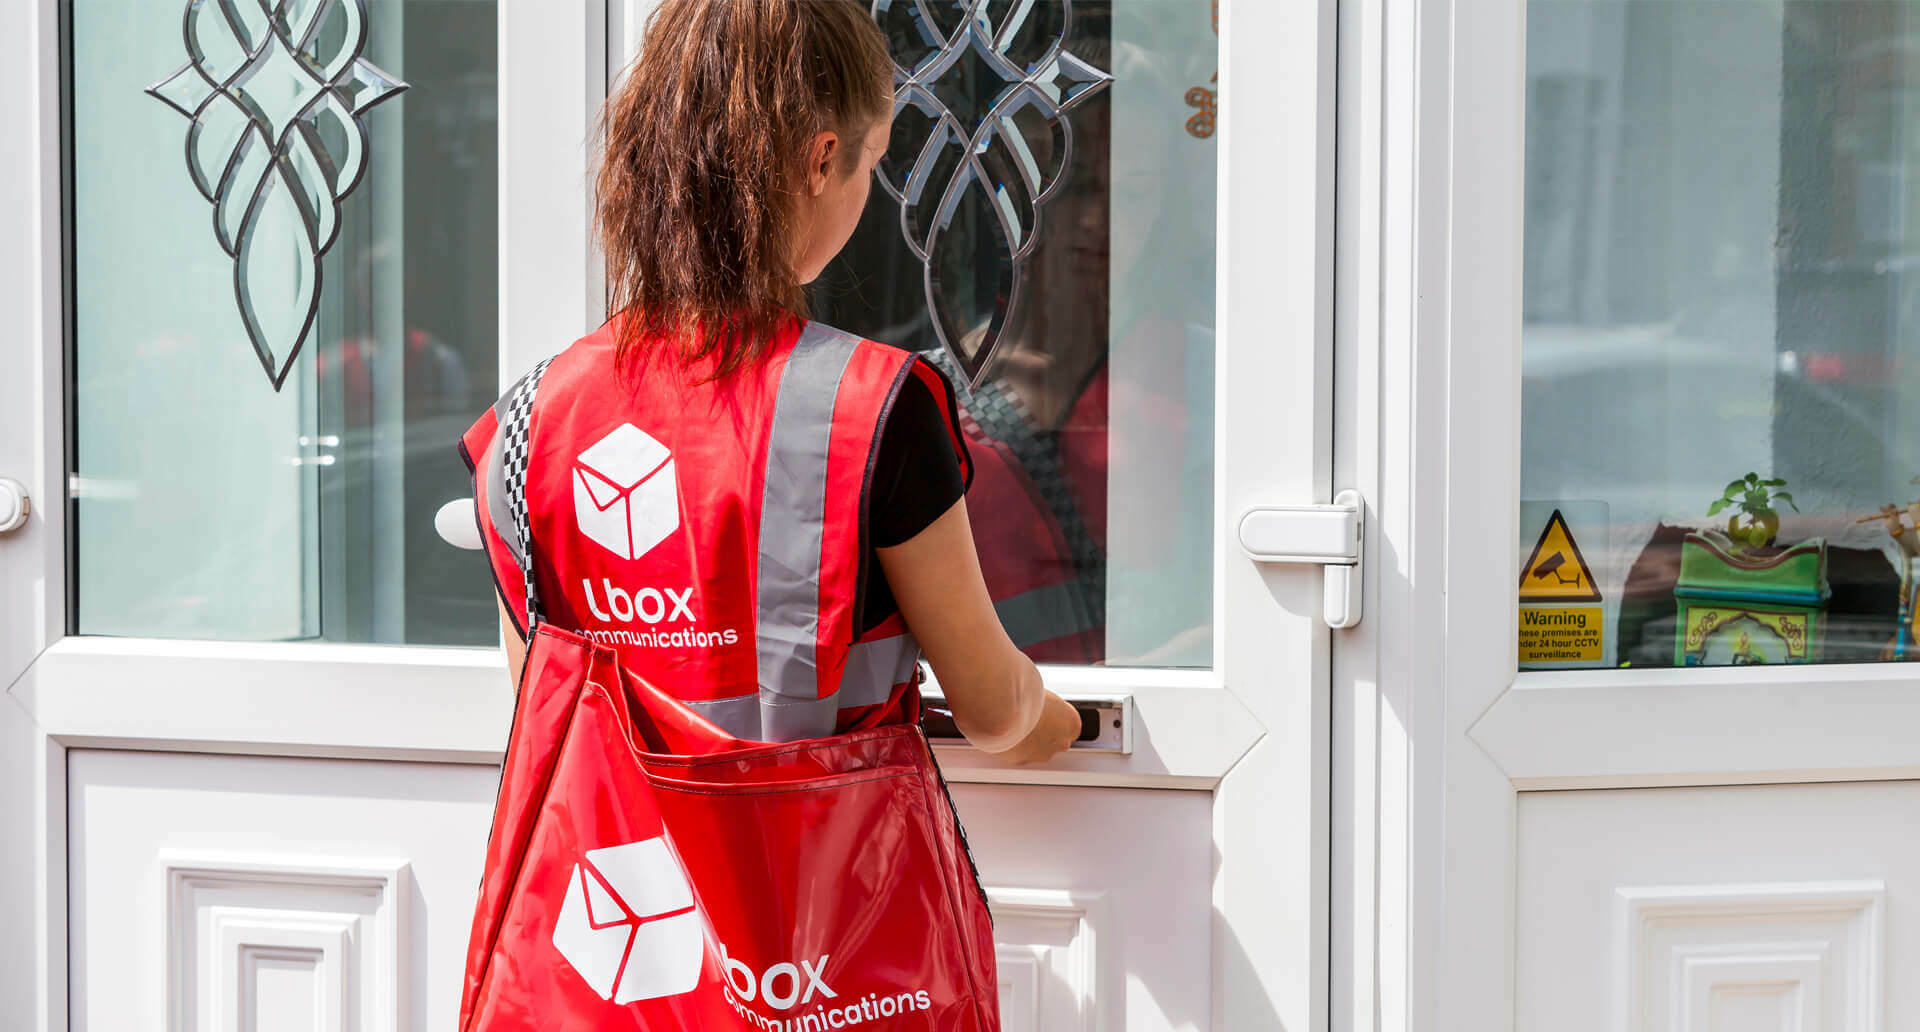 Lbox Communications delivery person